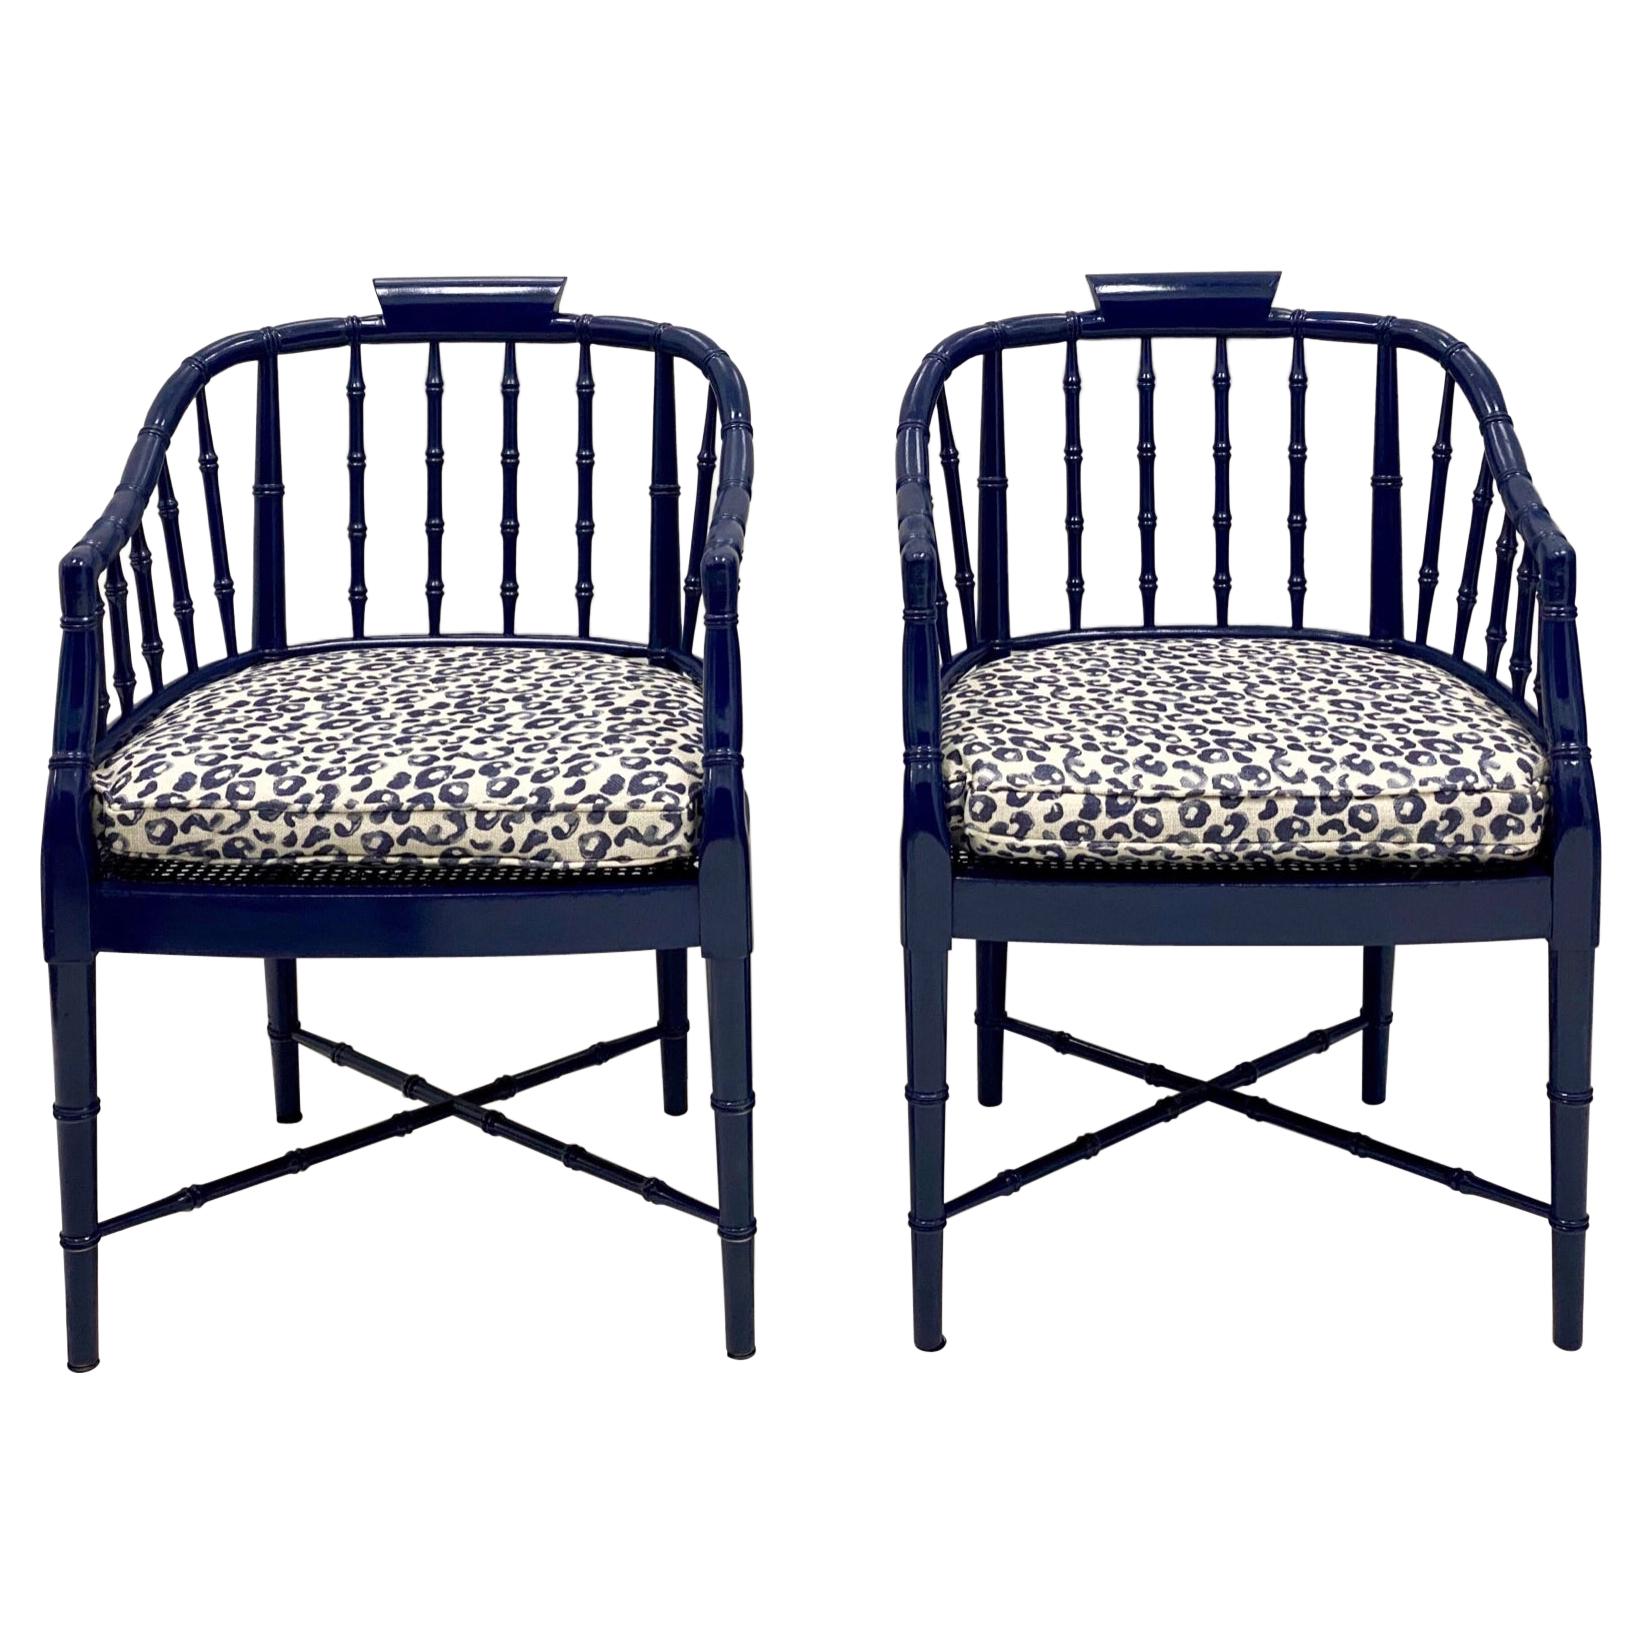 1970s Navy Lacquered Faux Bamboo Barrel Chairs with Leopard Cushions, a Pair